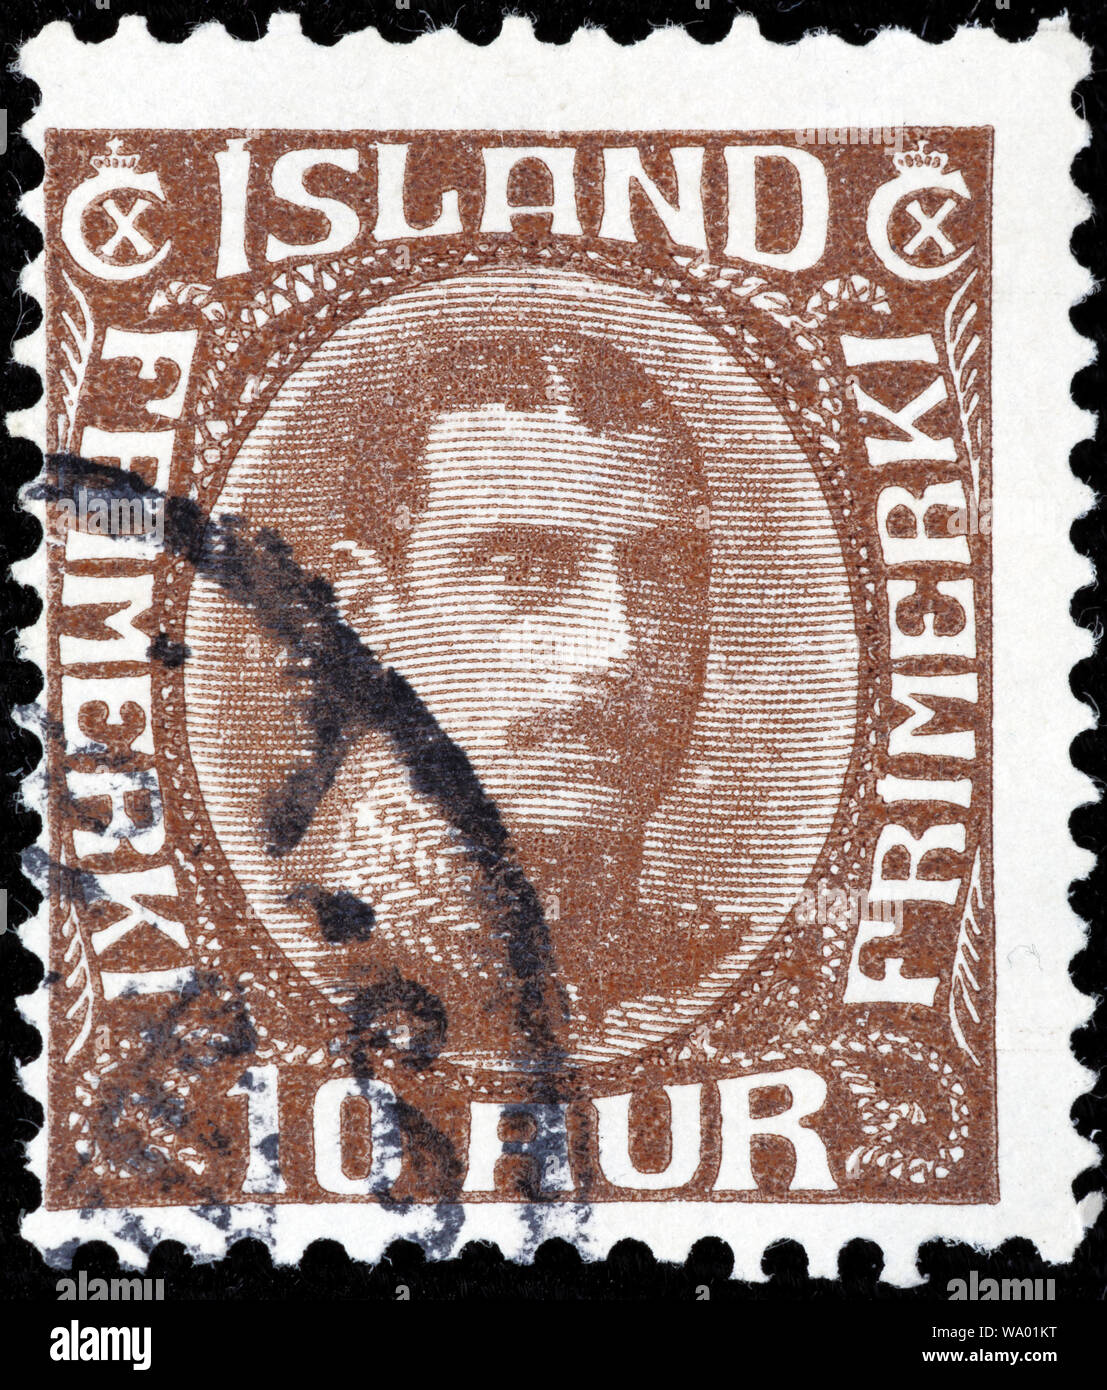 Christian X, King of Denmark and Iceland (1912-1947), postage stamp, Iceland, 1920 Stock Photo